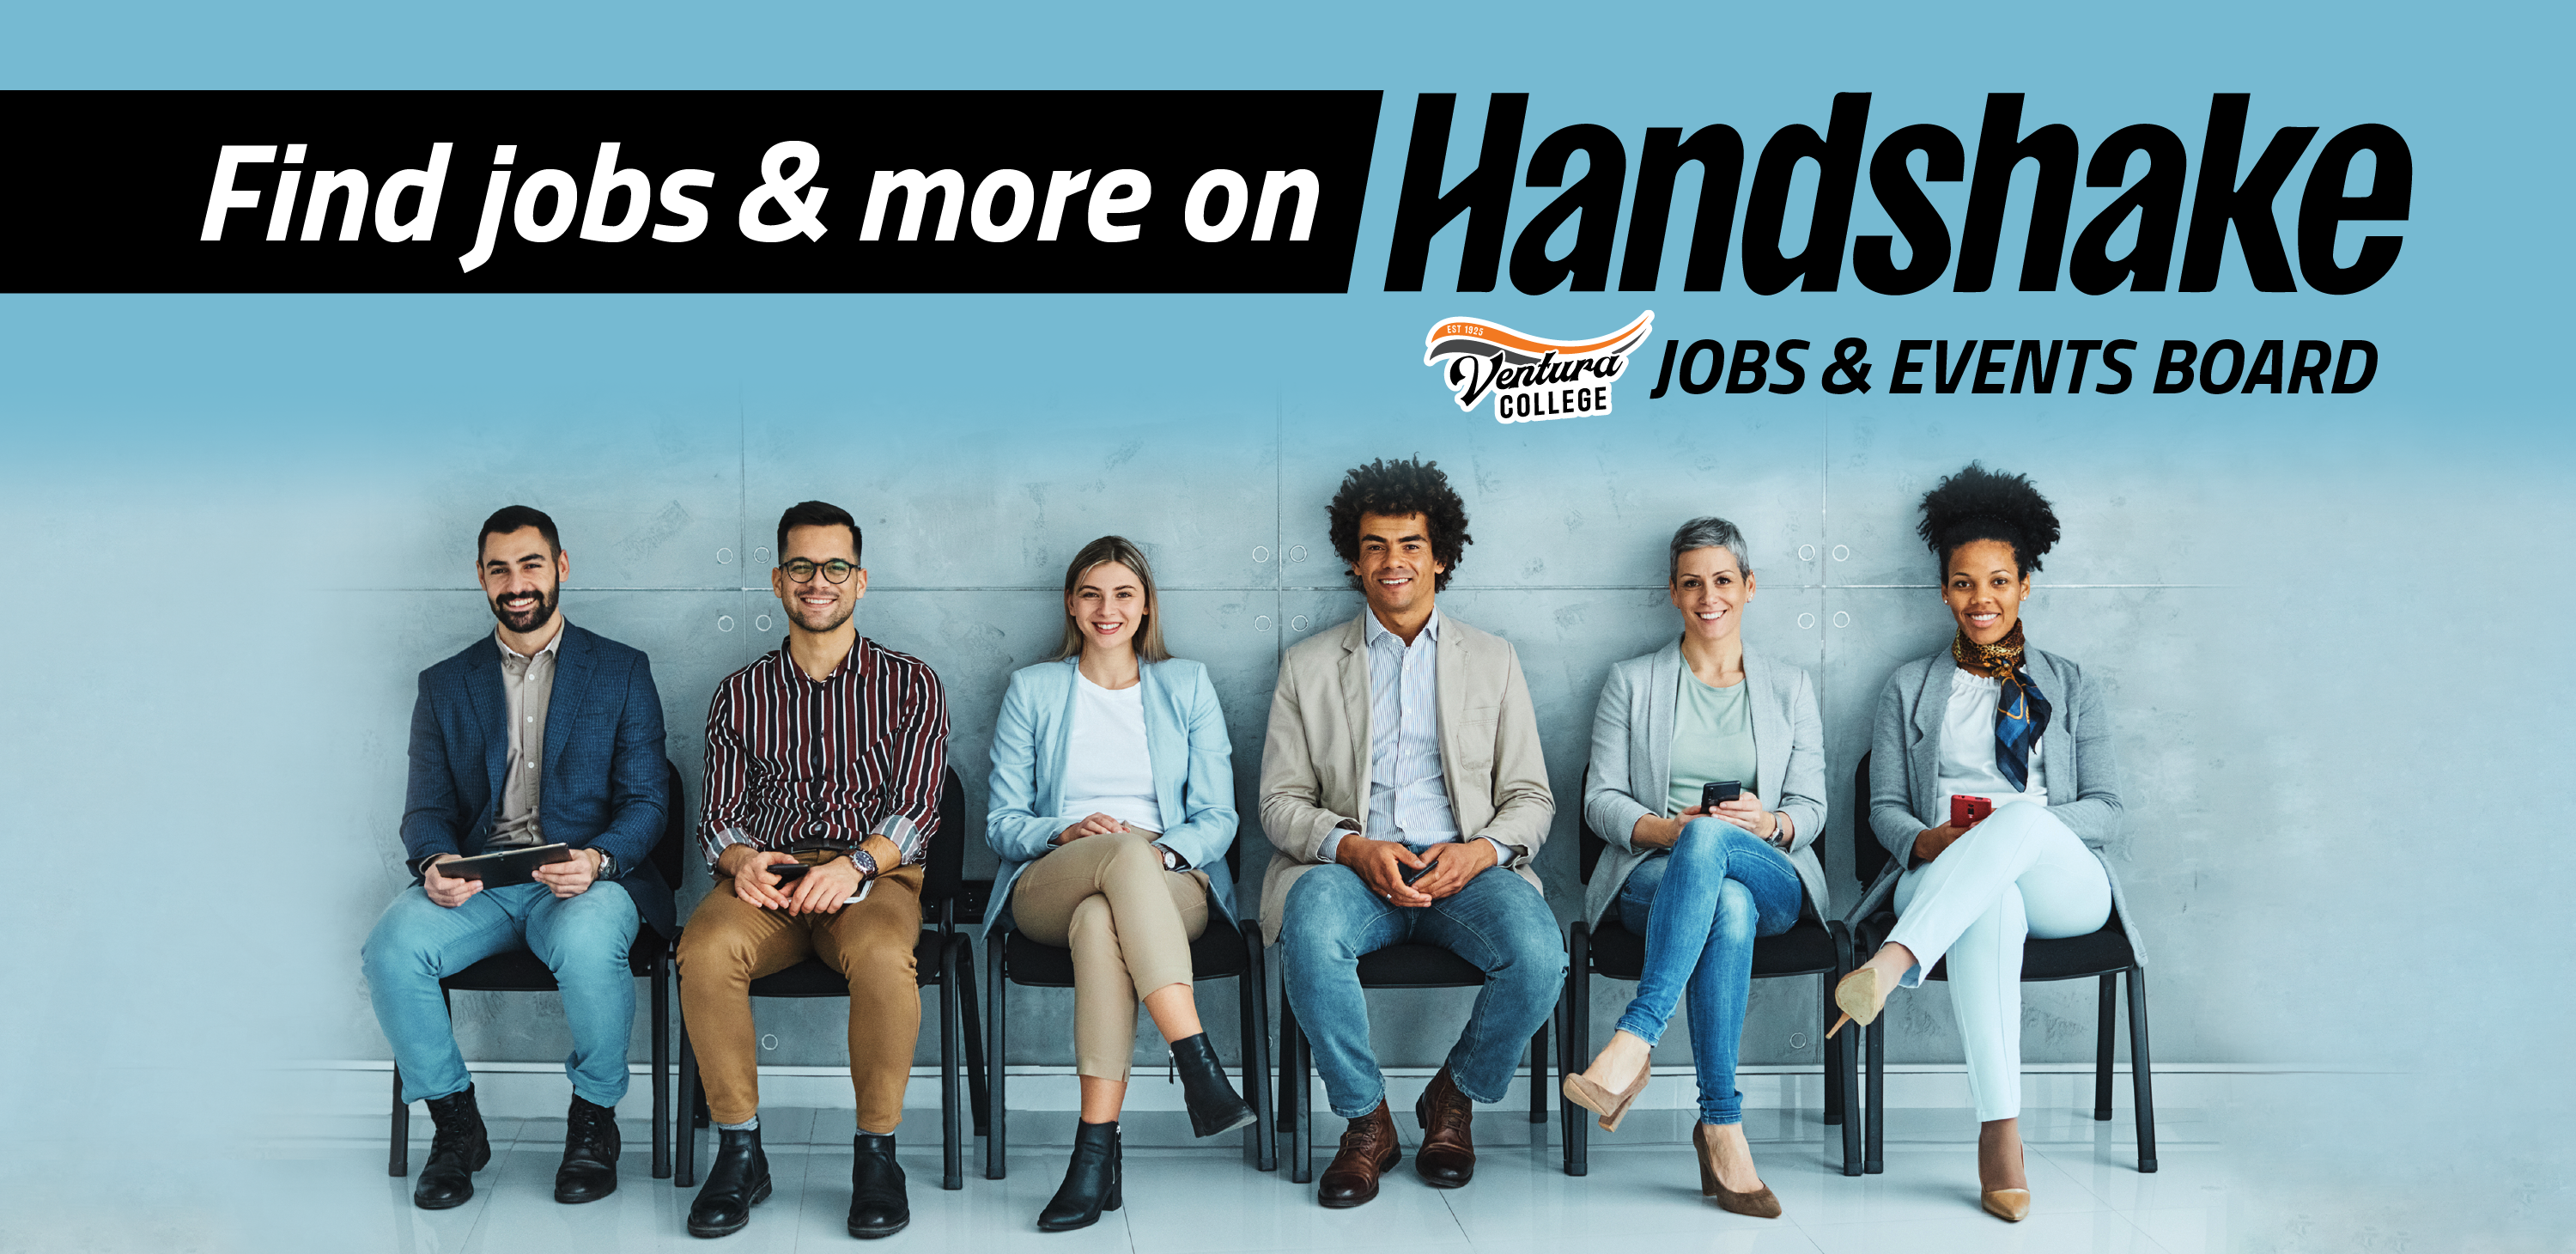 find jogs and more on Handshake jobs and events board